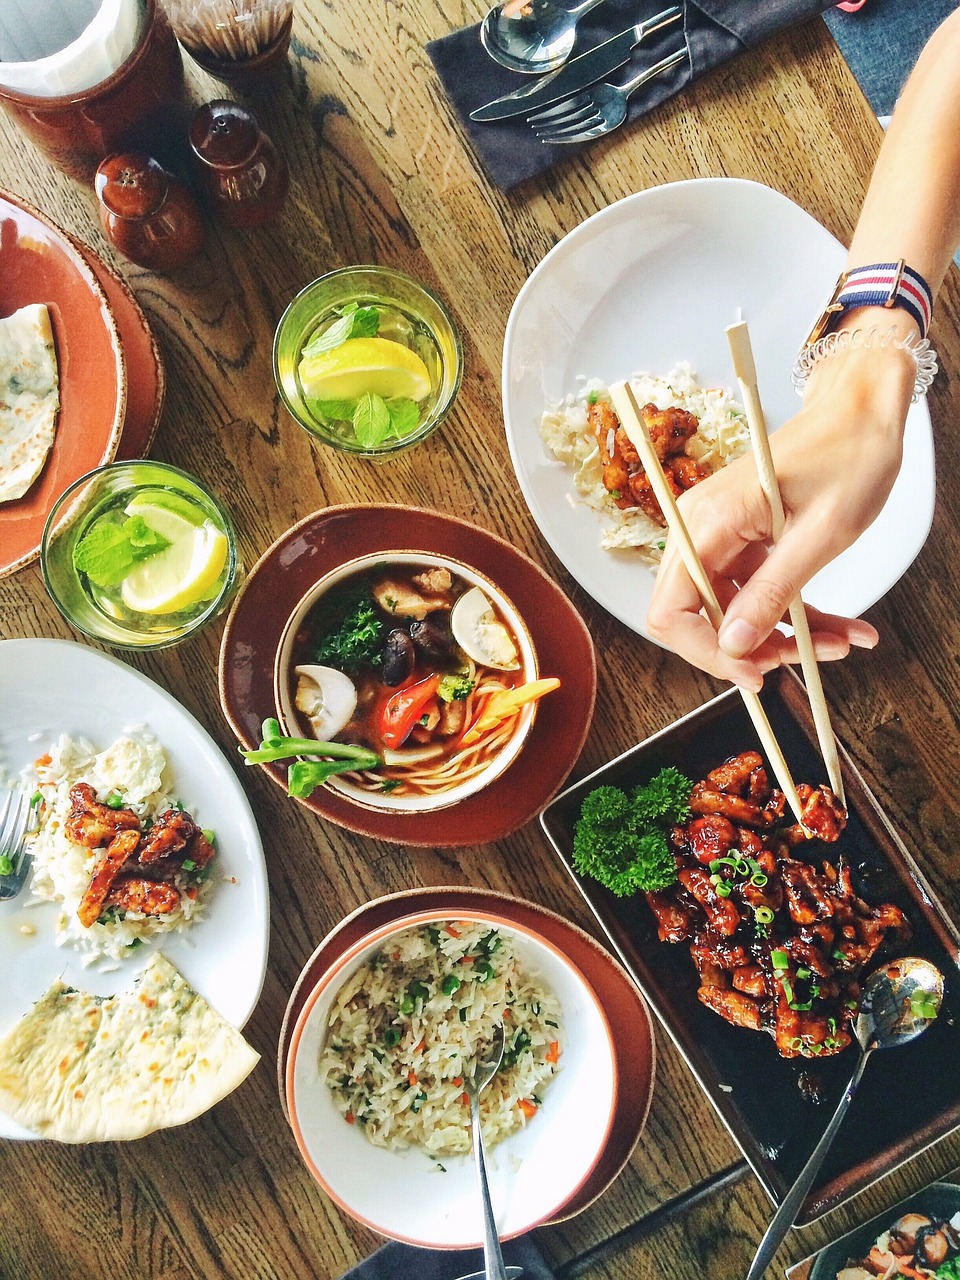 Photo of table with food and hand holding chopsticks.